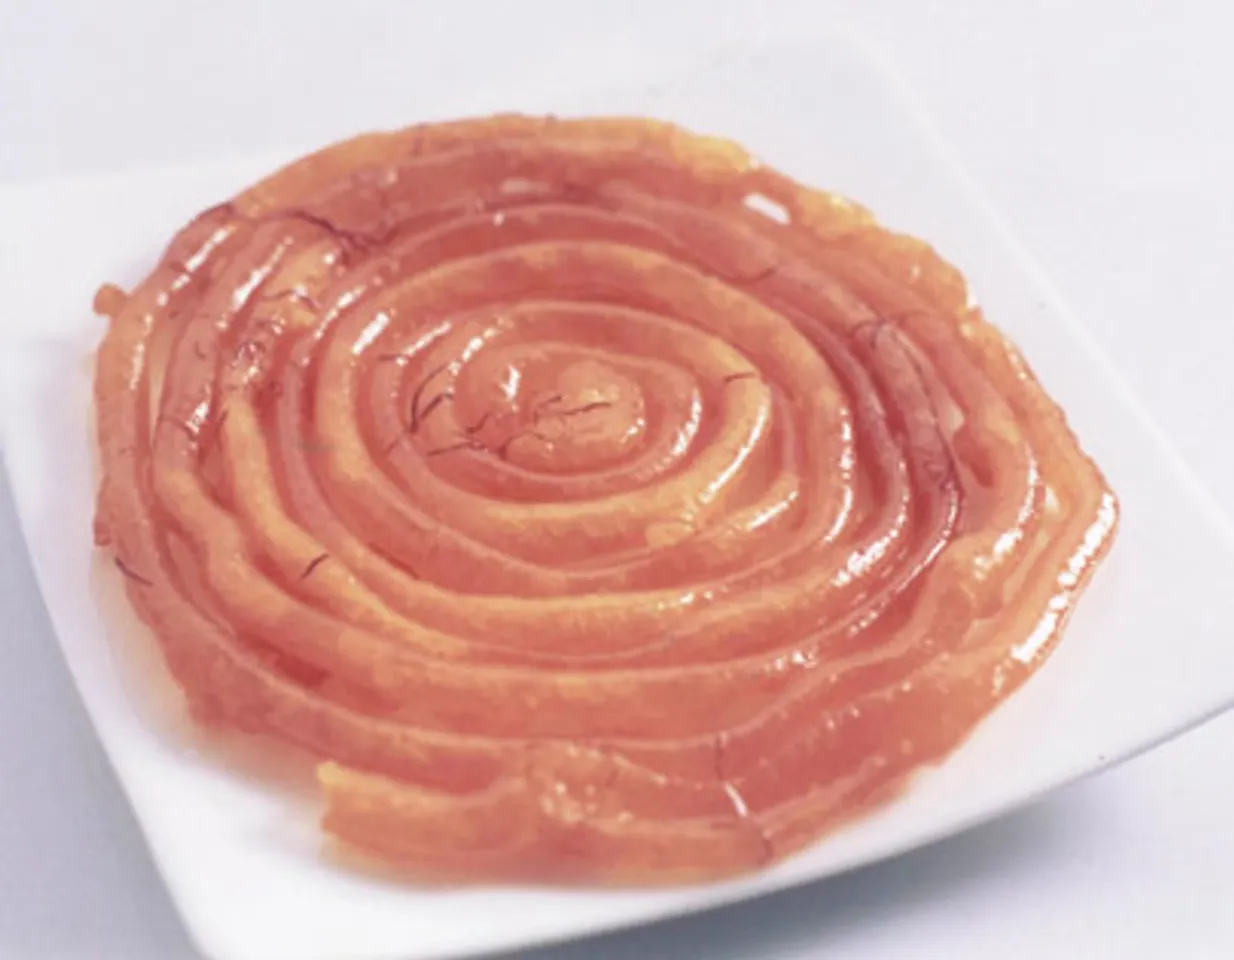 Top 5 Indian Desserts Jalebi The whirl of delight